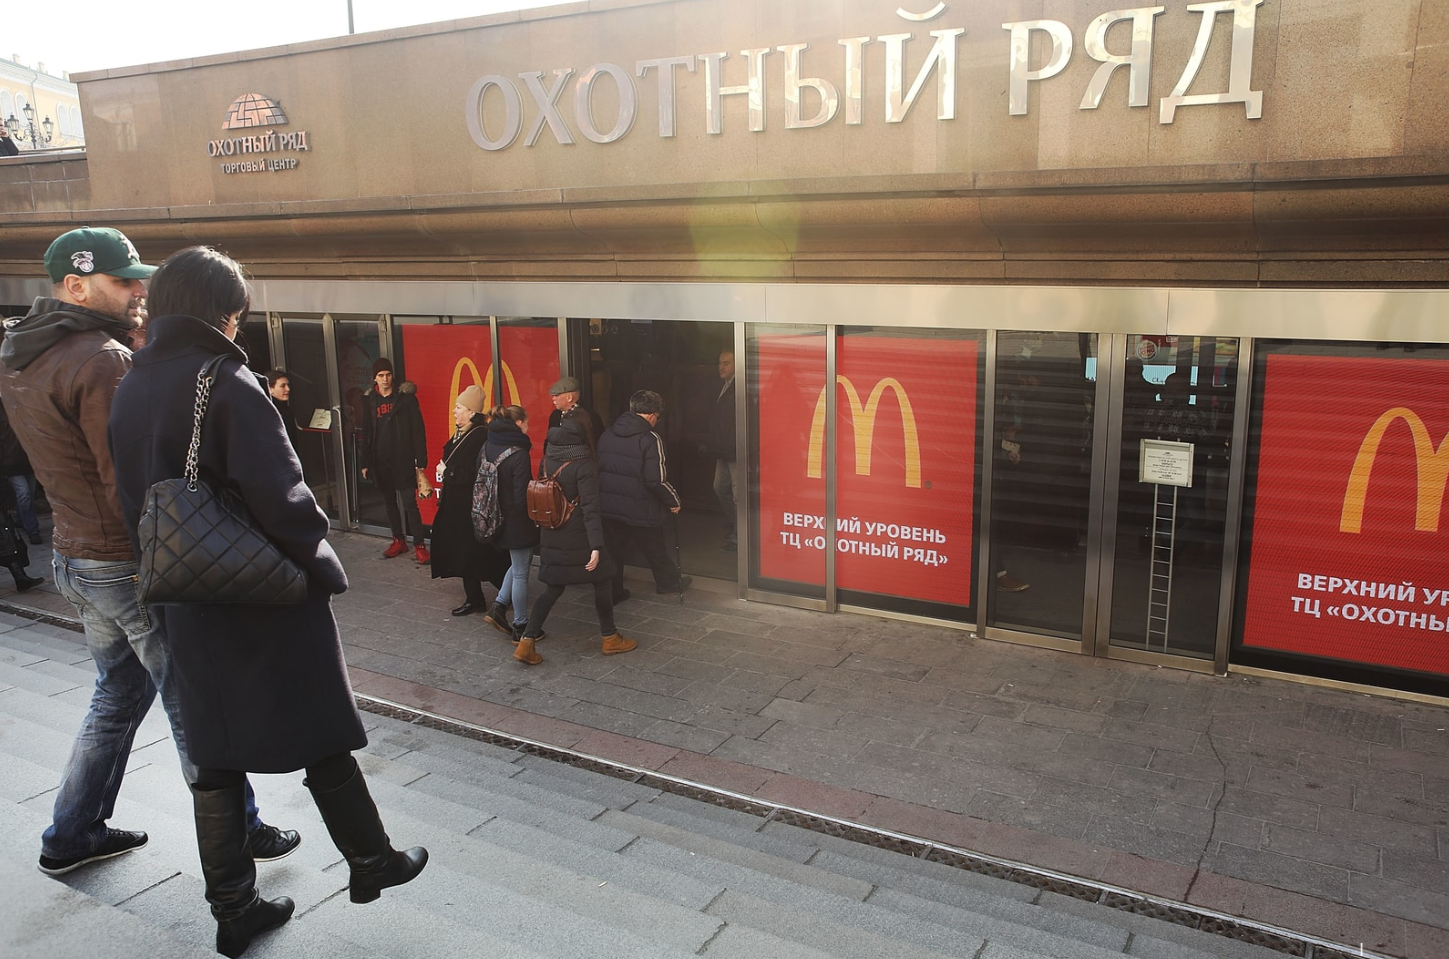 McDonald's to temporarily close 850 restaurants in Russia in response to the Ukraine invasion